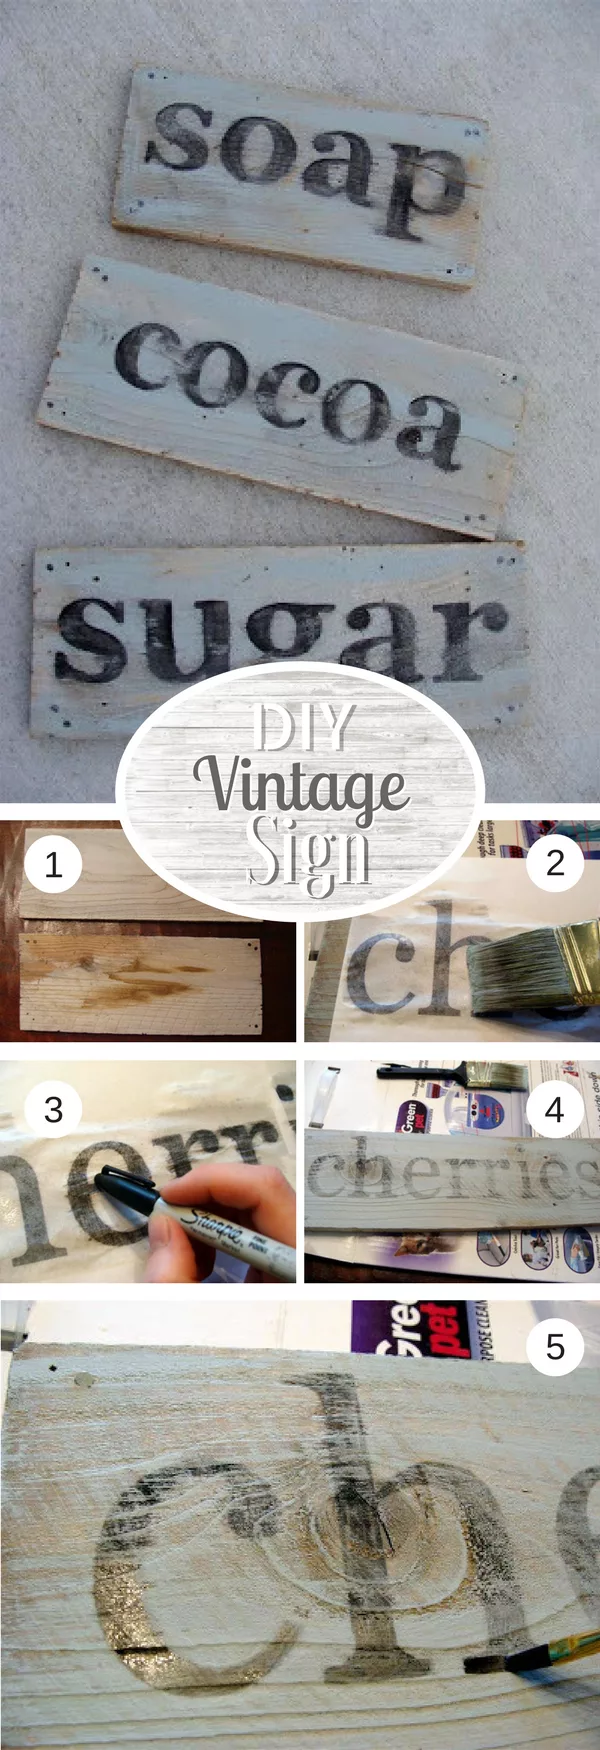 17 Fab DIY Farmhouse Signs You Can Make Yourself - Check out how to make an easy DIY vintage sign